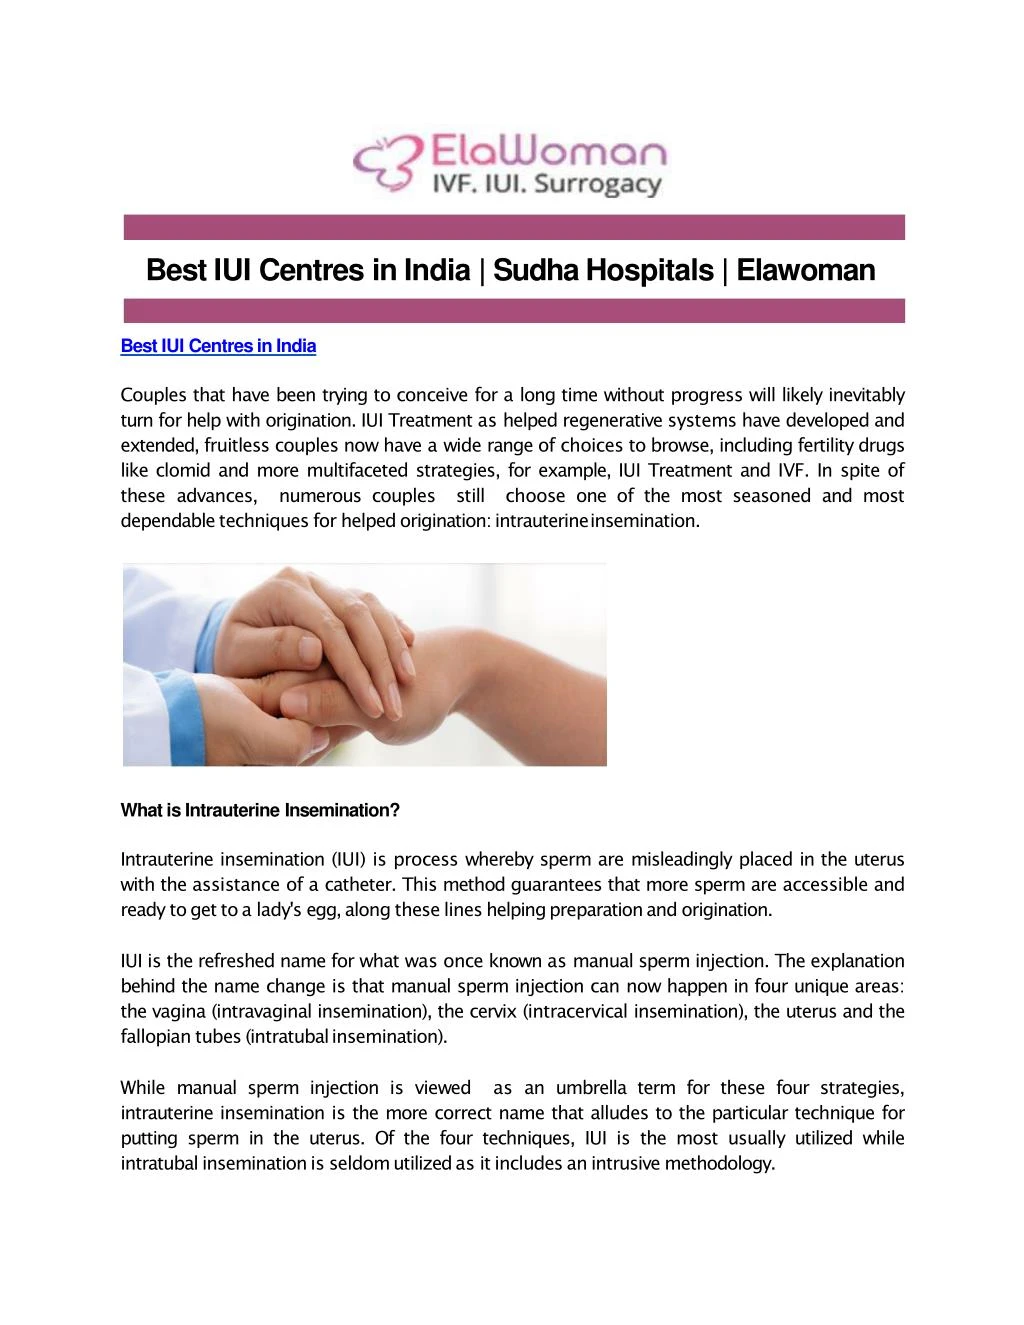 best iui centres in india sudha hospitals elawoman